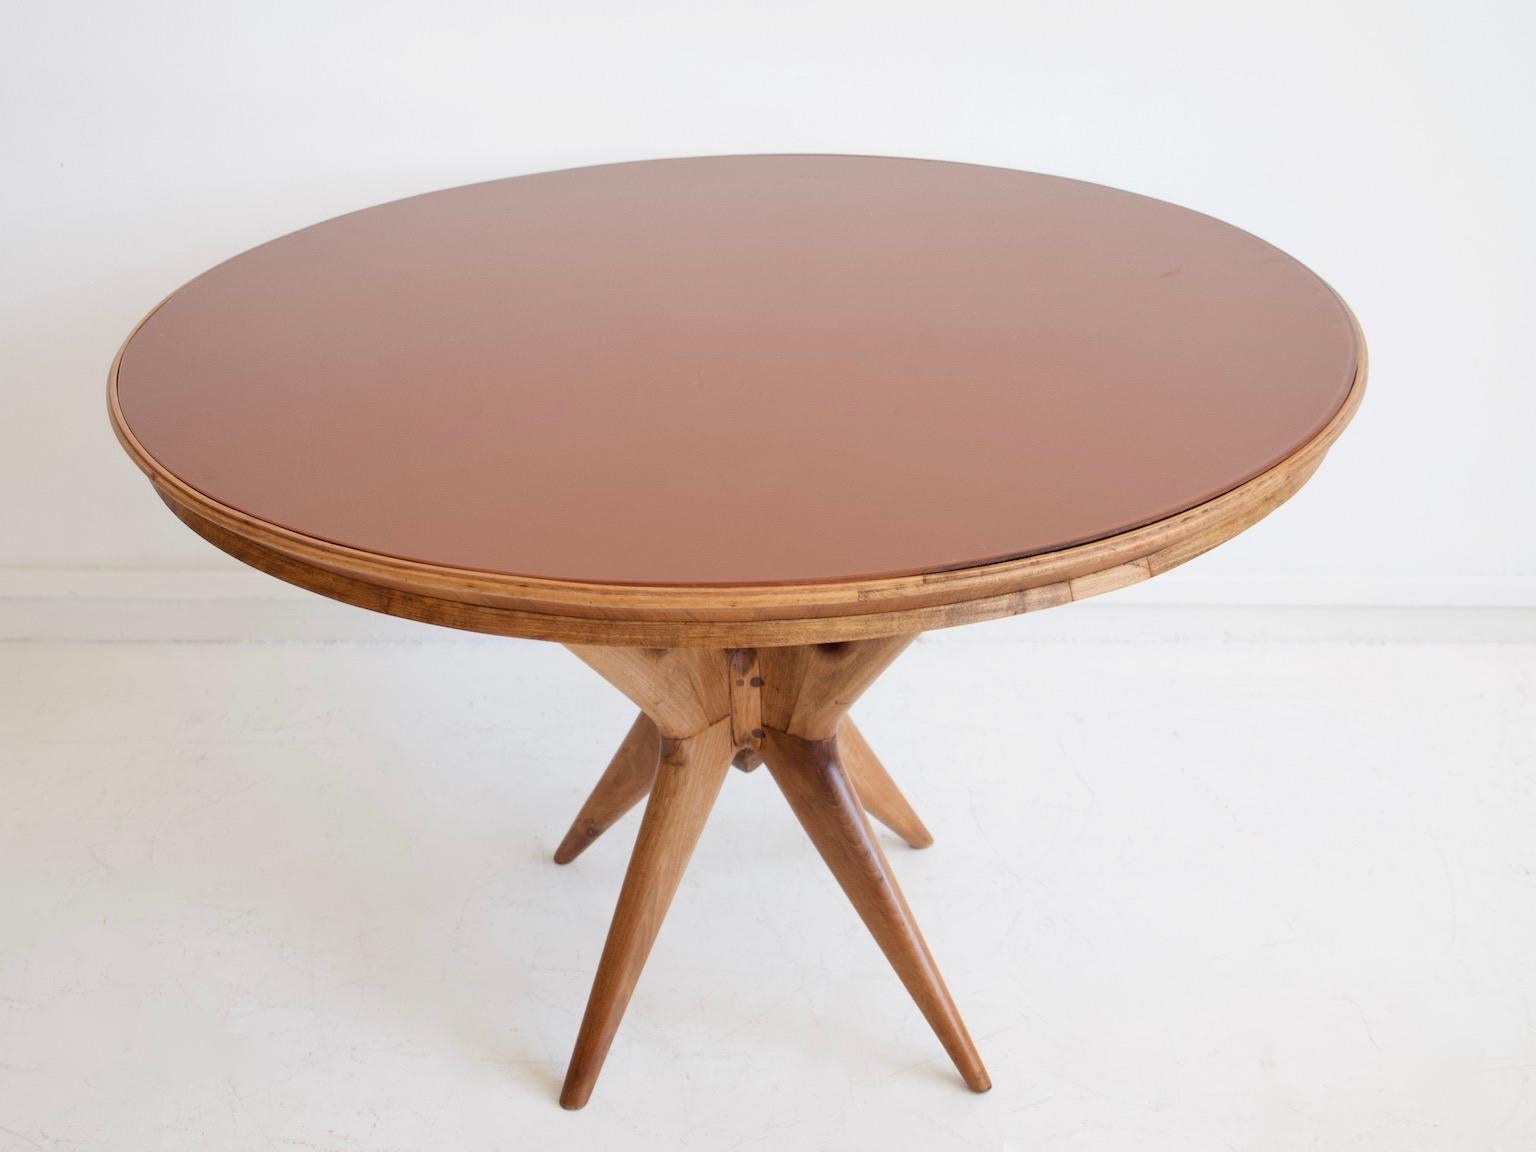 Painted Italian Modern Round Walnut Wood Table with Glass Top